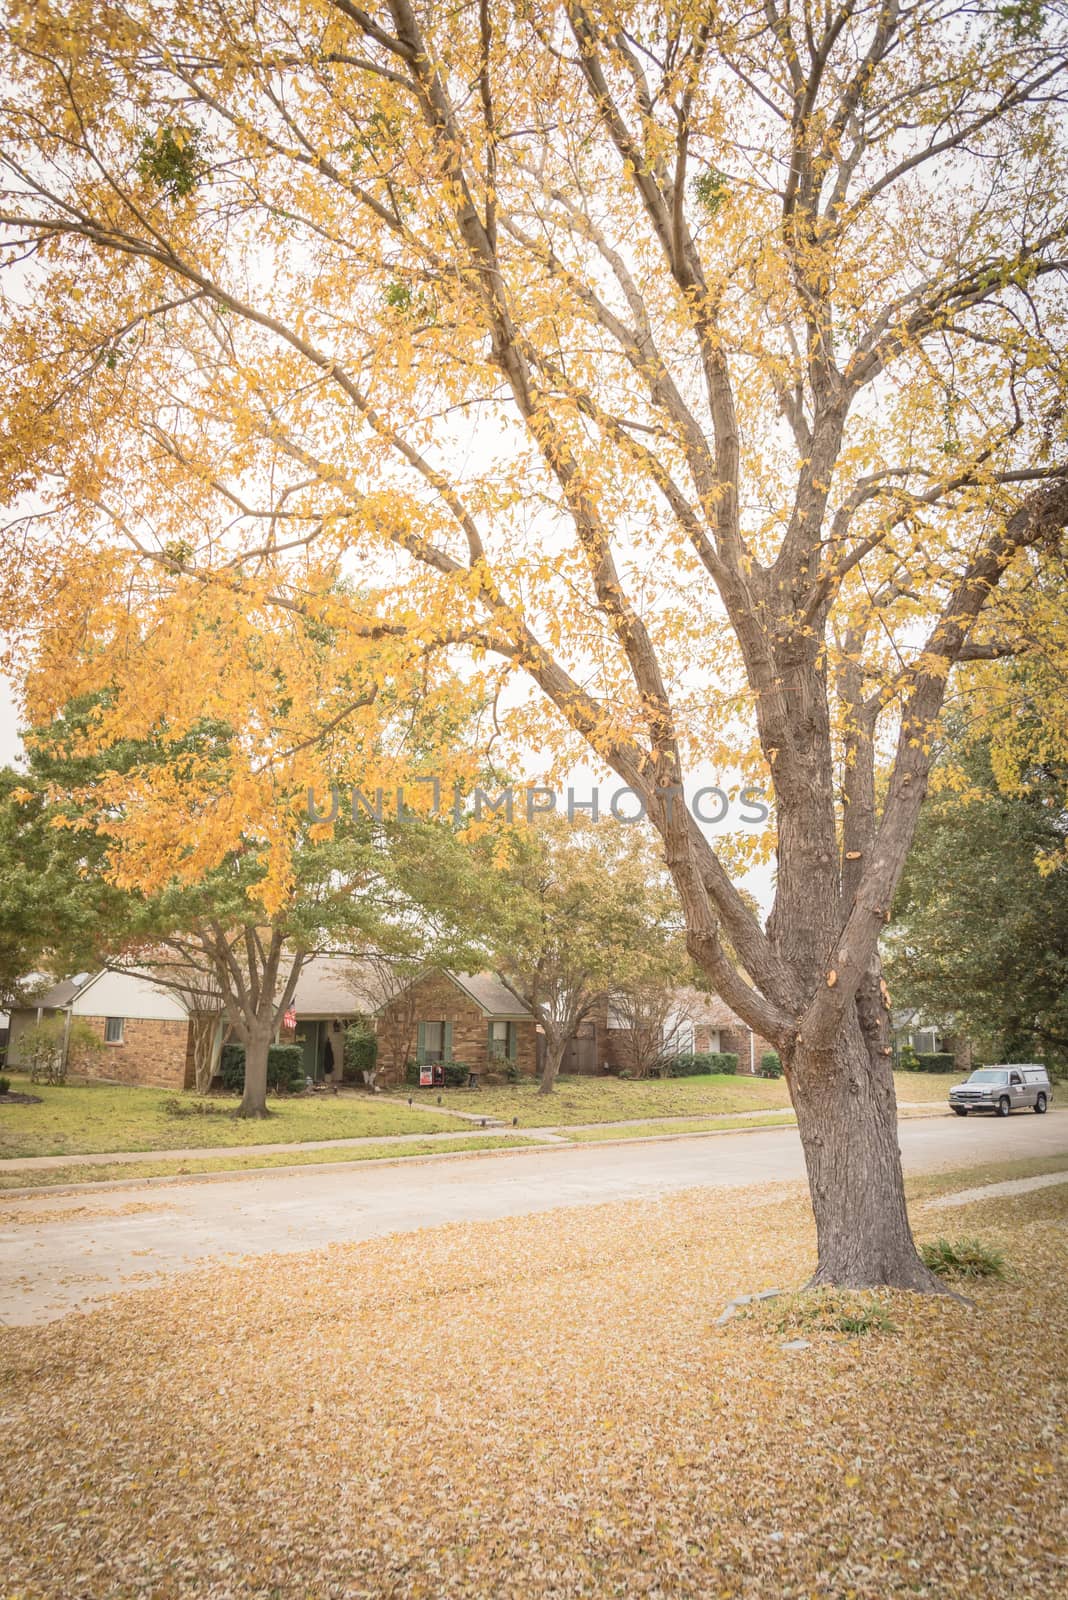 Residential neighborhood with covered autumn leaves on front yard and side walk near Dallas by trongnguyen